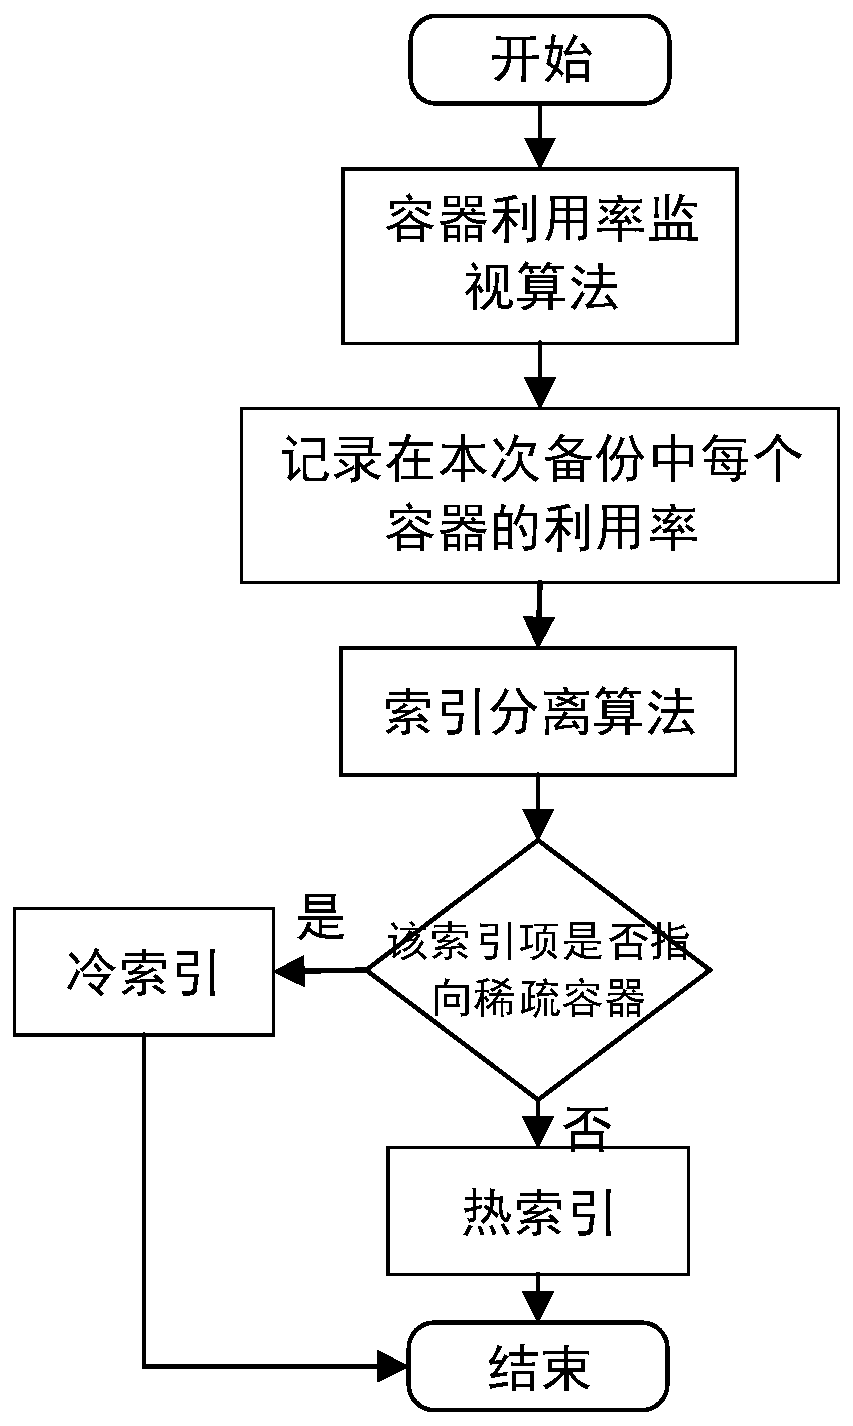 Cold and hot index identification and classification management method in data deduplication system